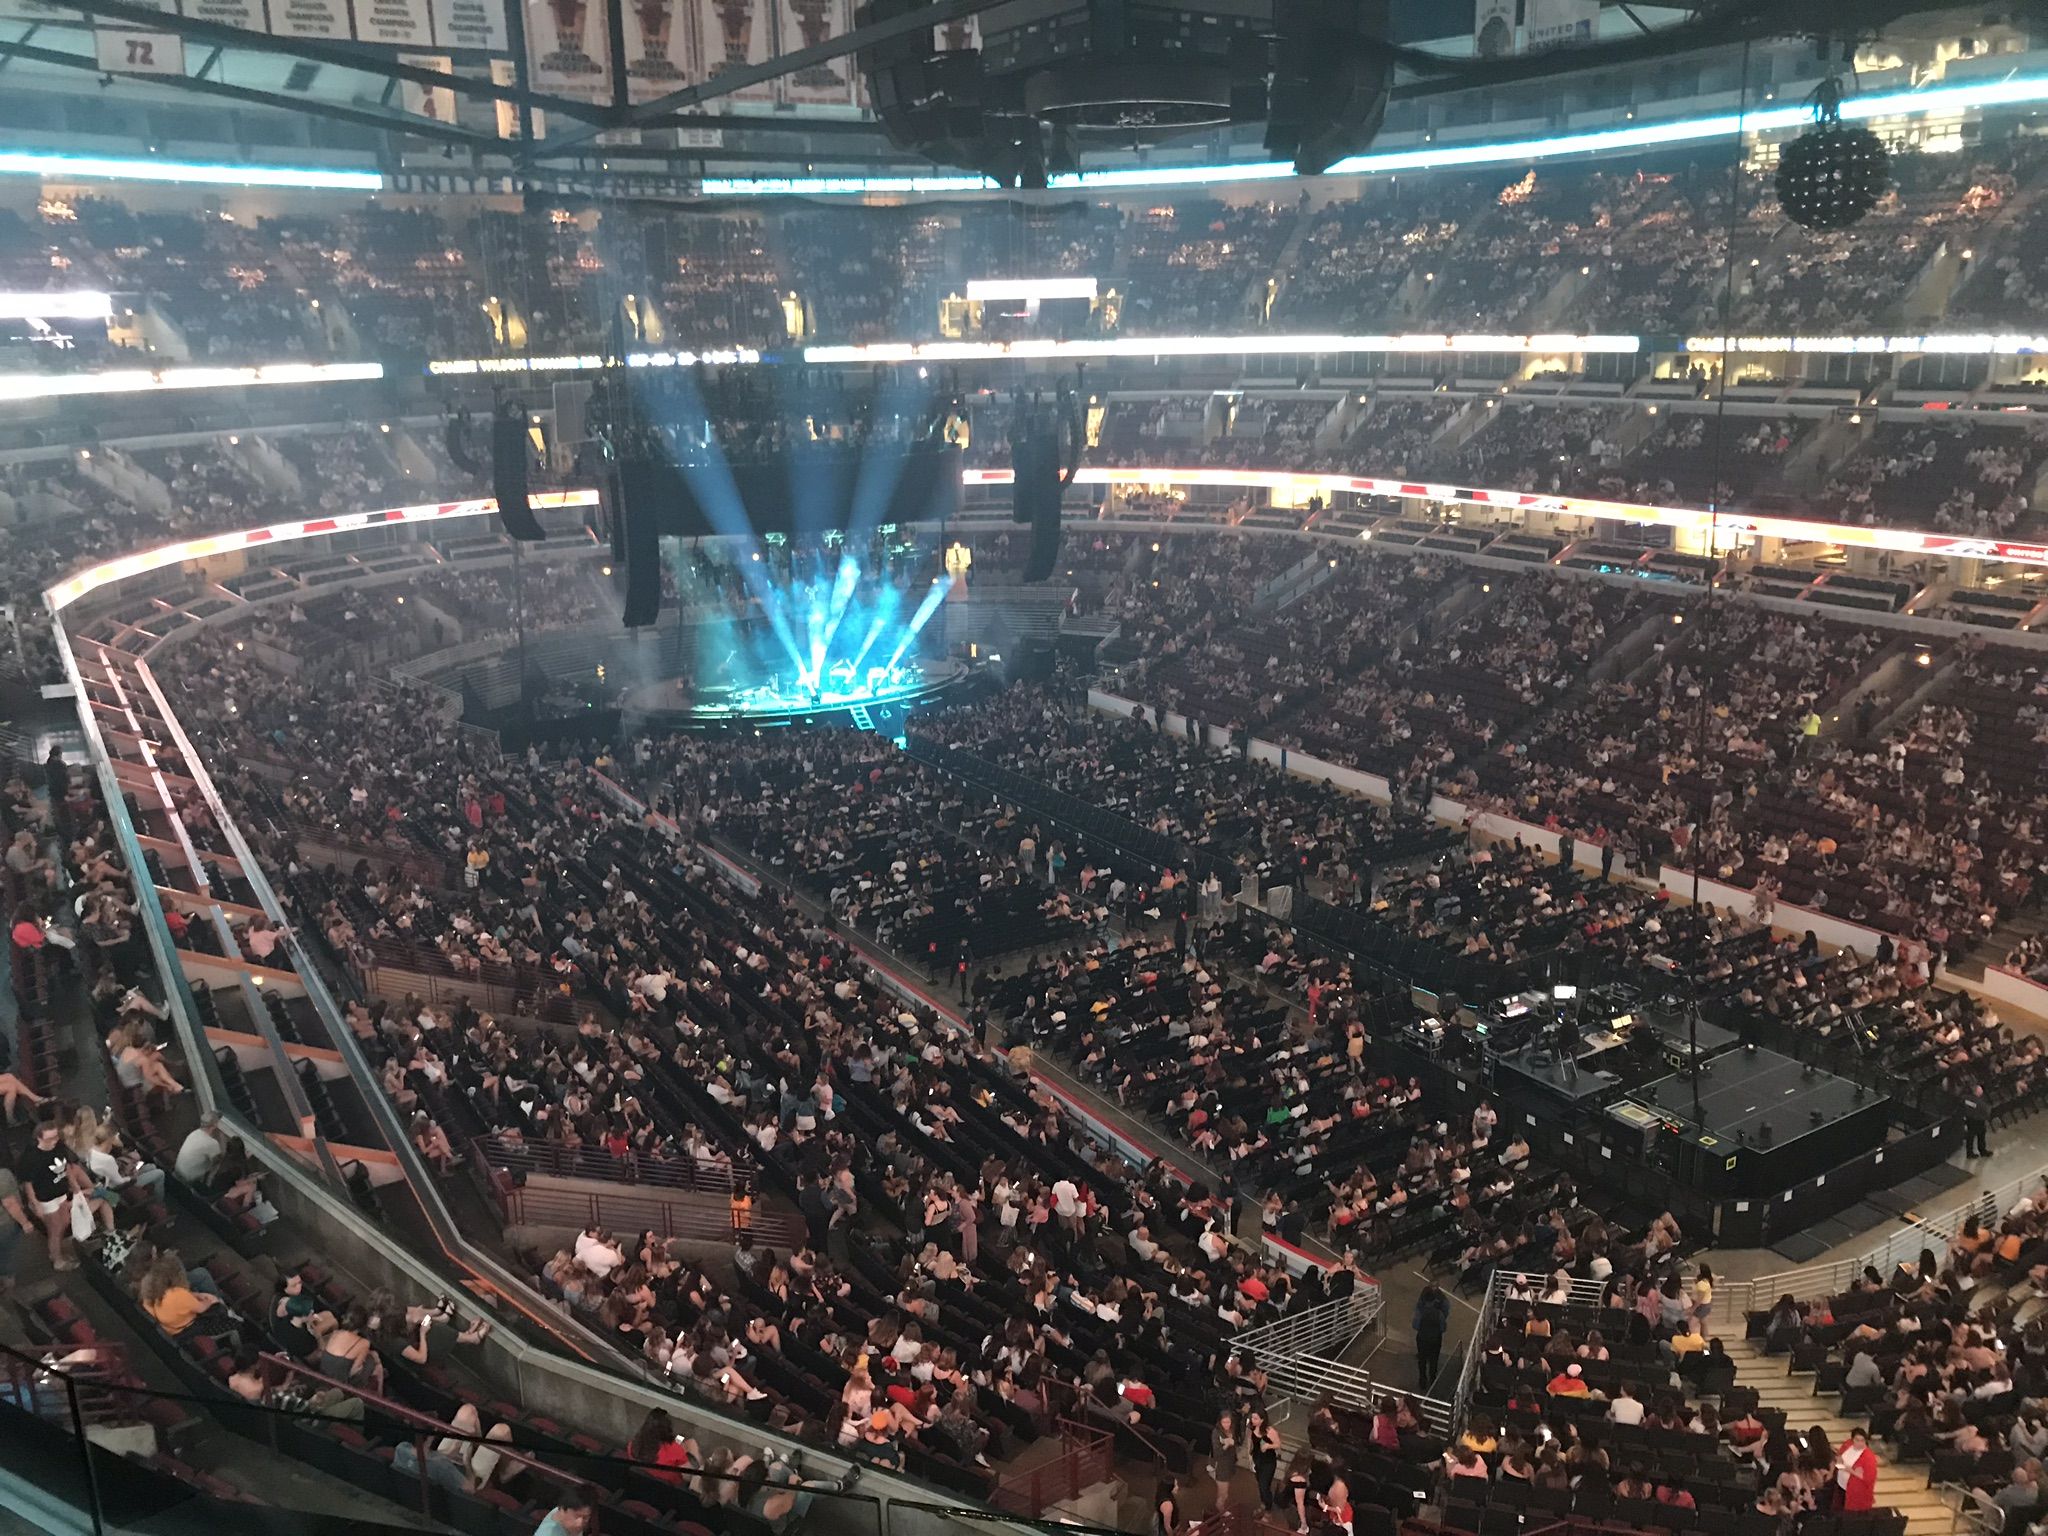 section 313, row 3 seat view  for concert - united center